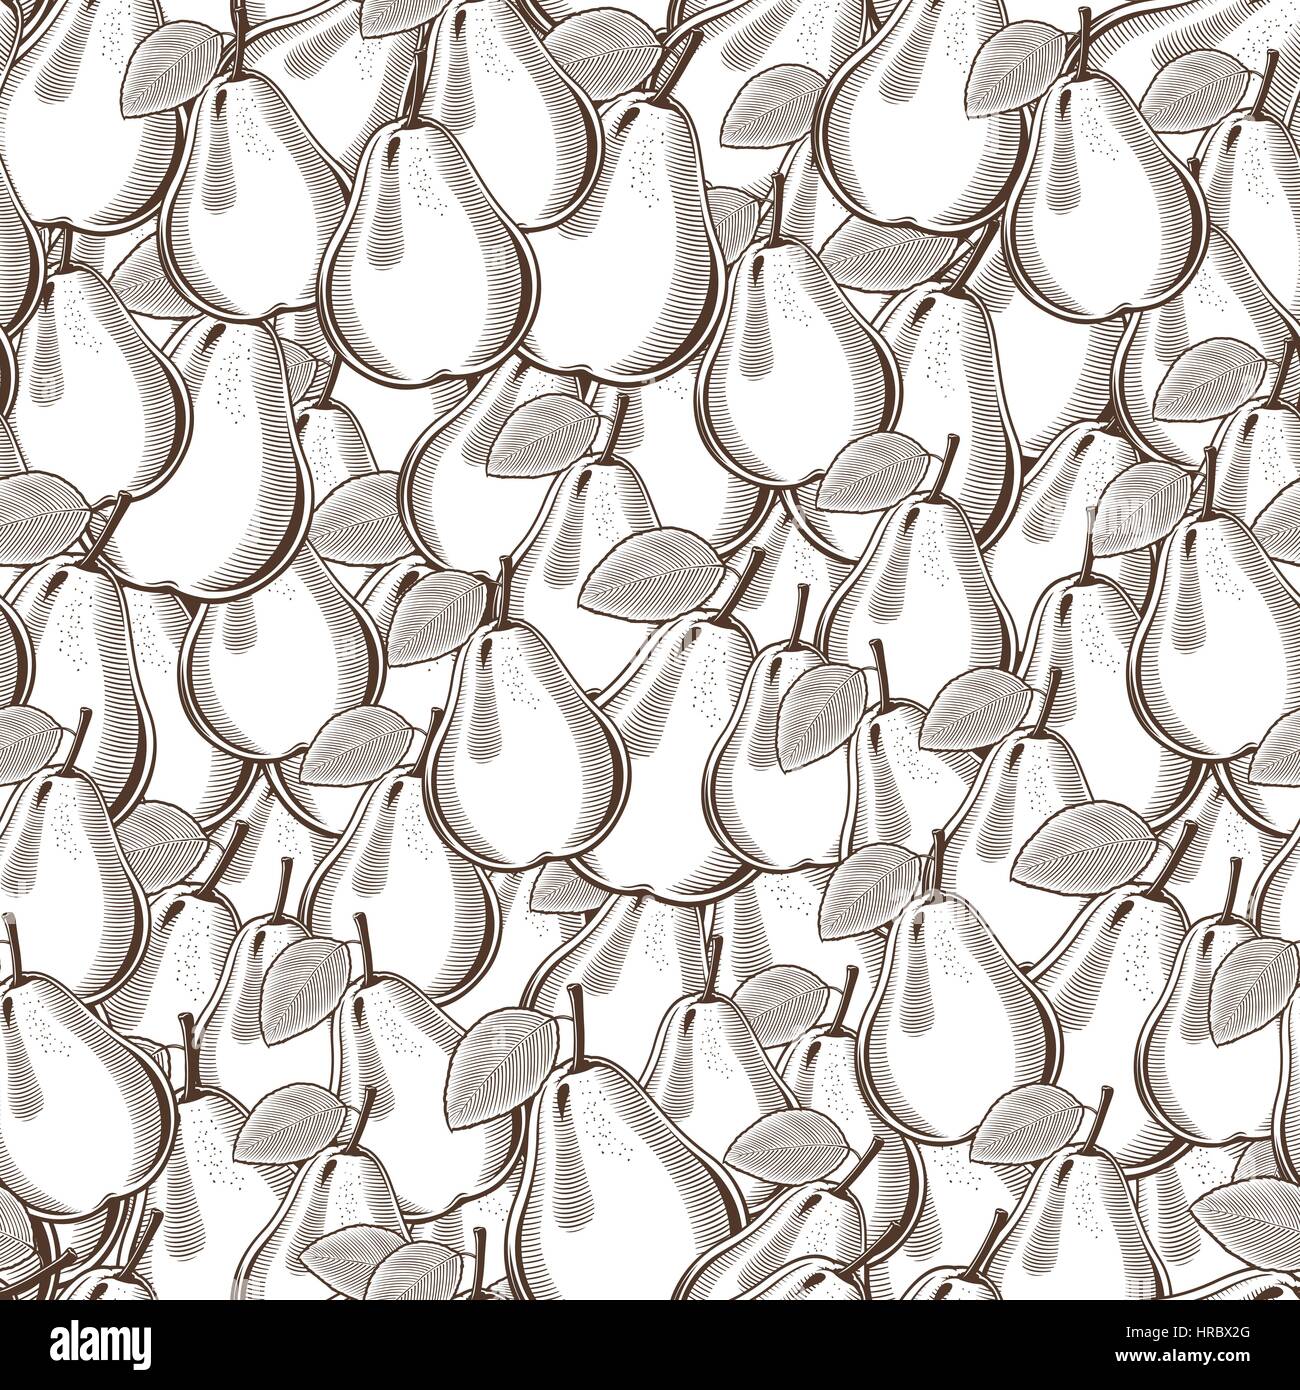 Vintage Pear Seamless Pattern Stock Vector